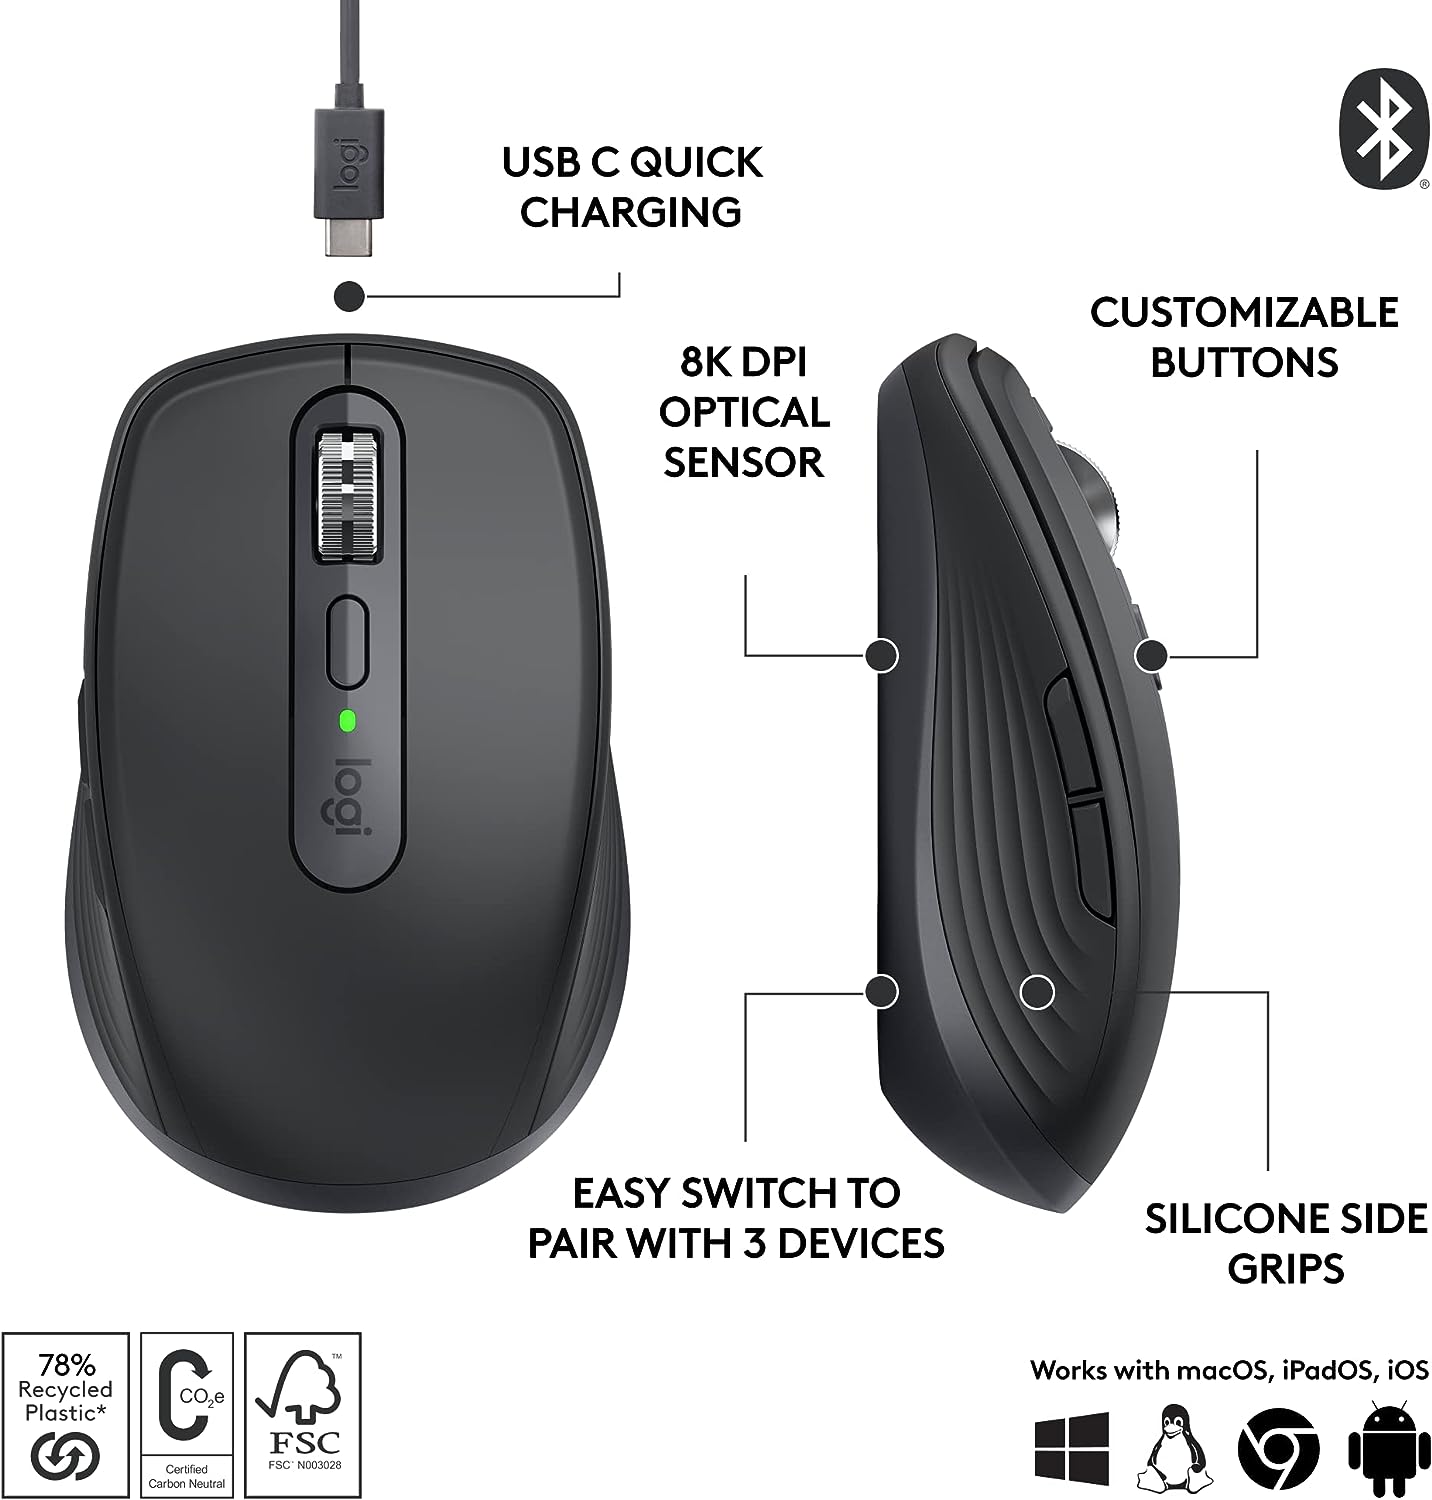 Logitech MX Anywhere 3S Compact Wireless Mouse, Fast Scrolling, 8K DPI Tracking, Quiet Clicks, USB C, Bluetooth, Windows PC, Linux, Chrome, Mac - Graphite